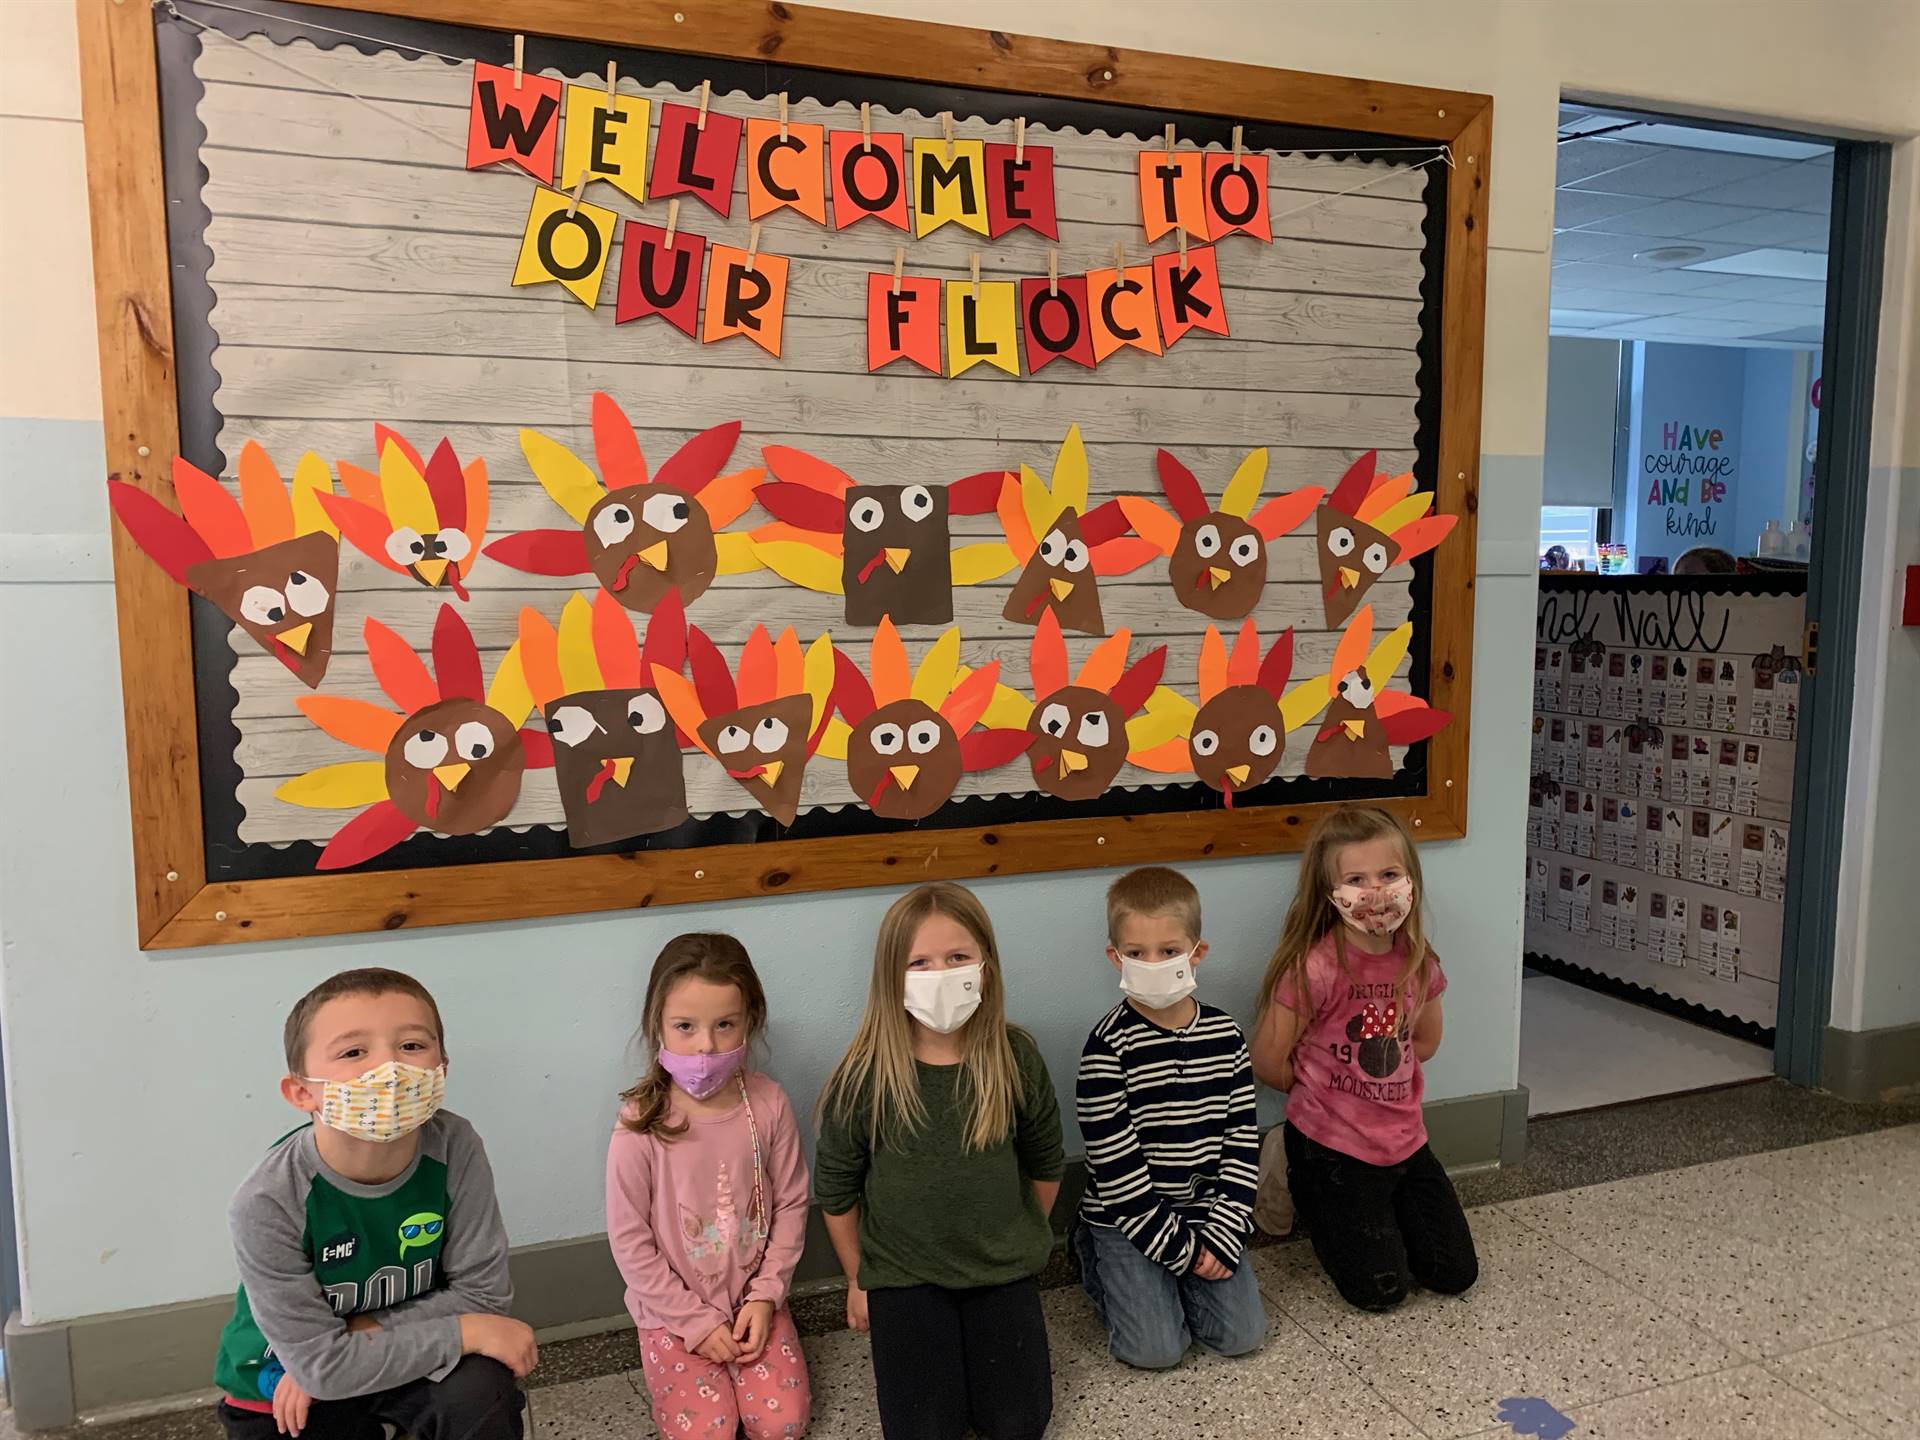 5 students kneeling in front of bulletin board that has yellow and red turkeys and words that say "w